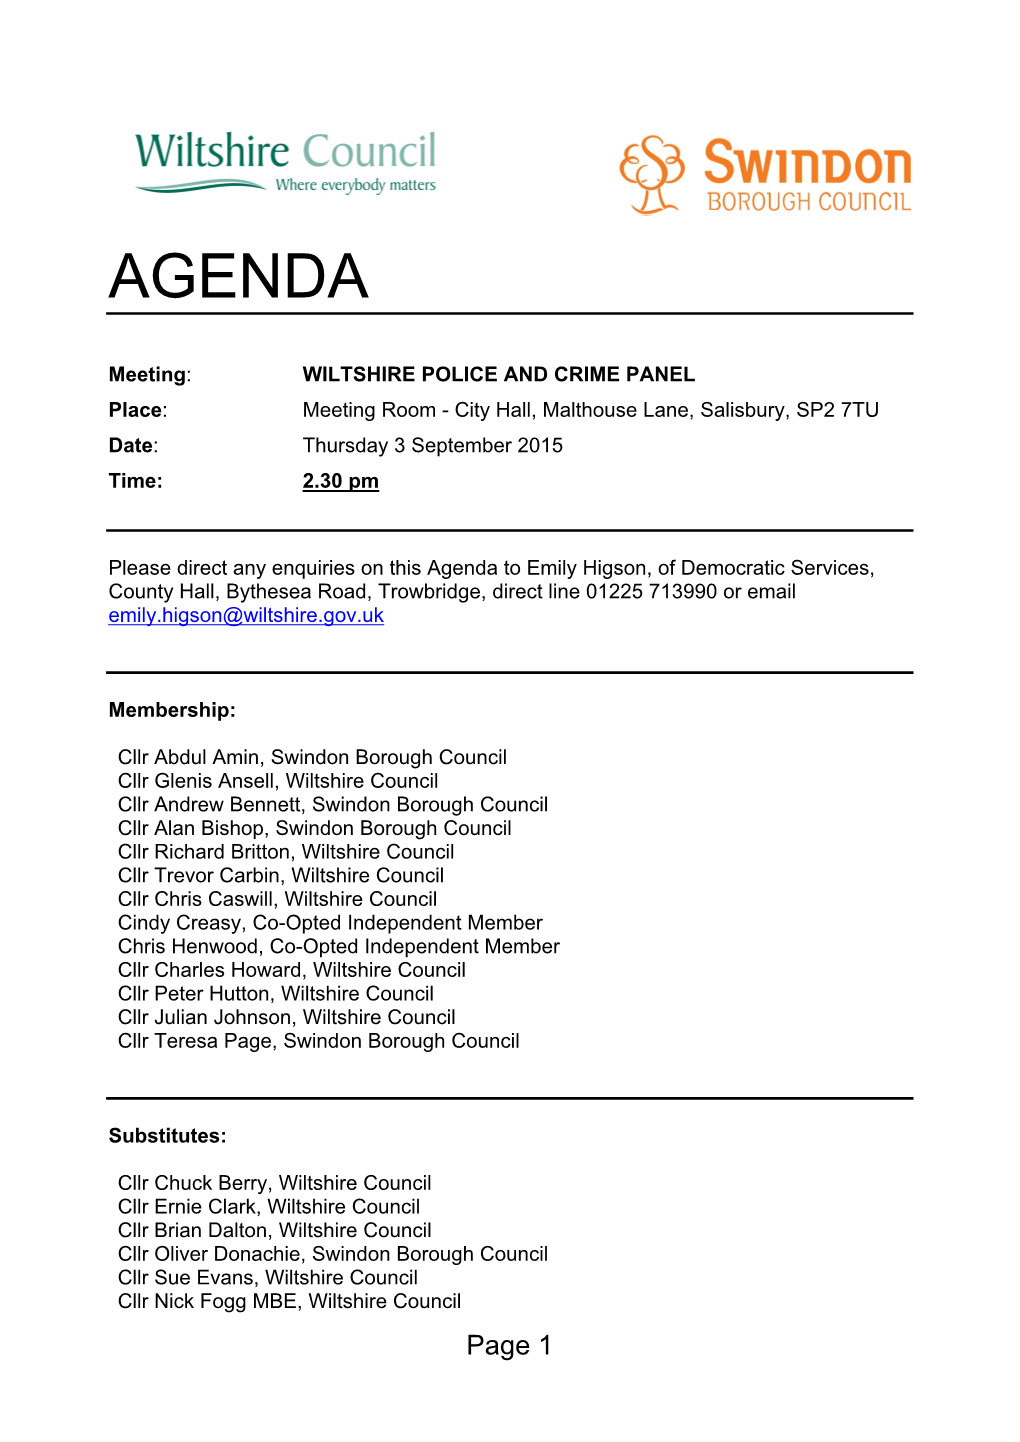 (Public Pack)Agenda Document for Wiltshire Police and Crime Panel, 03/09/2015 14:30